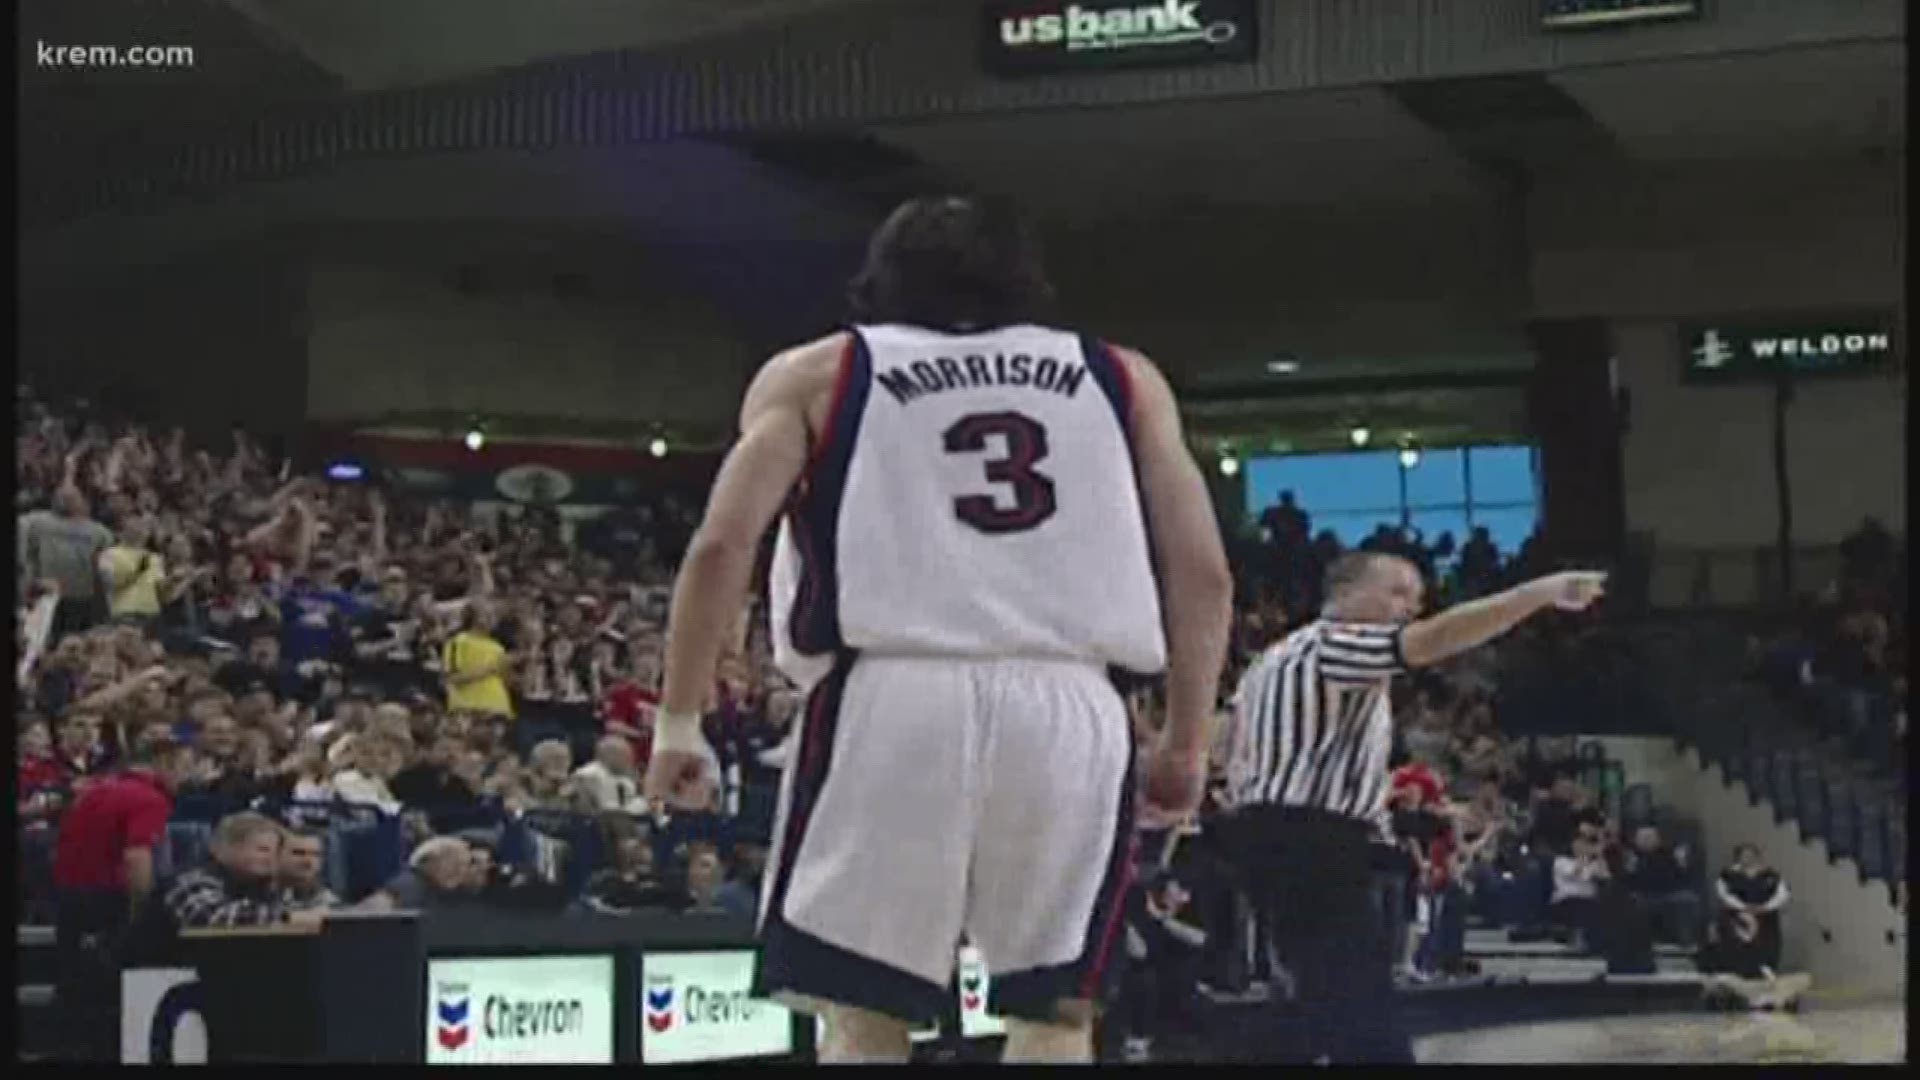 The Gonzaga legend will be honored with a jersey hanging ceremony before the Zags game against San Diego. Morrison would go on to win two NBA titles.